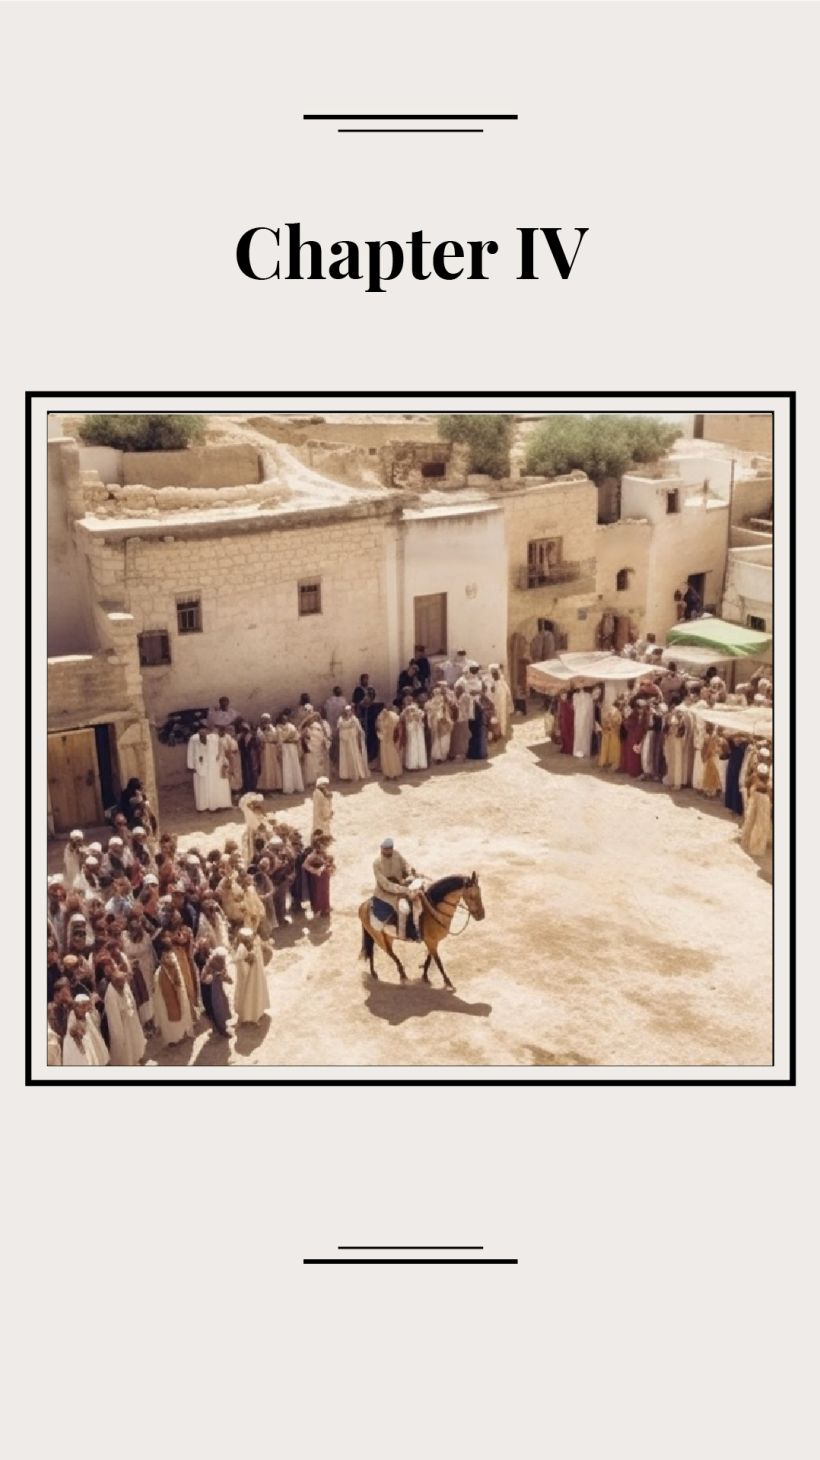 This AI generated image shows people gathered in the square of a Palestinian village. A man is on a horse close to the centre of the square while people line the square. The square is surrounded by simple cream stone houses